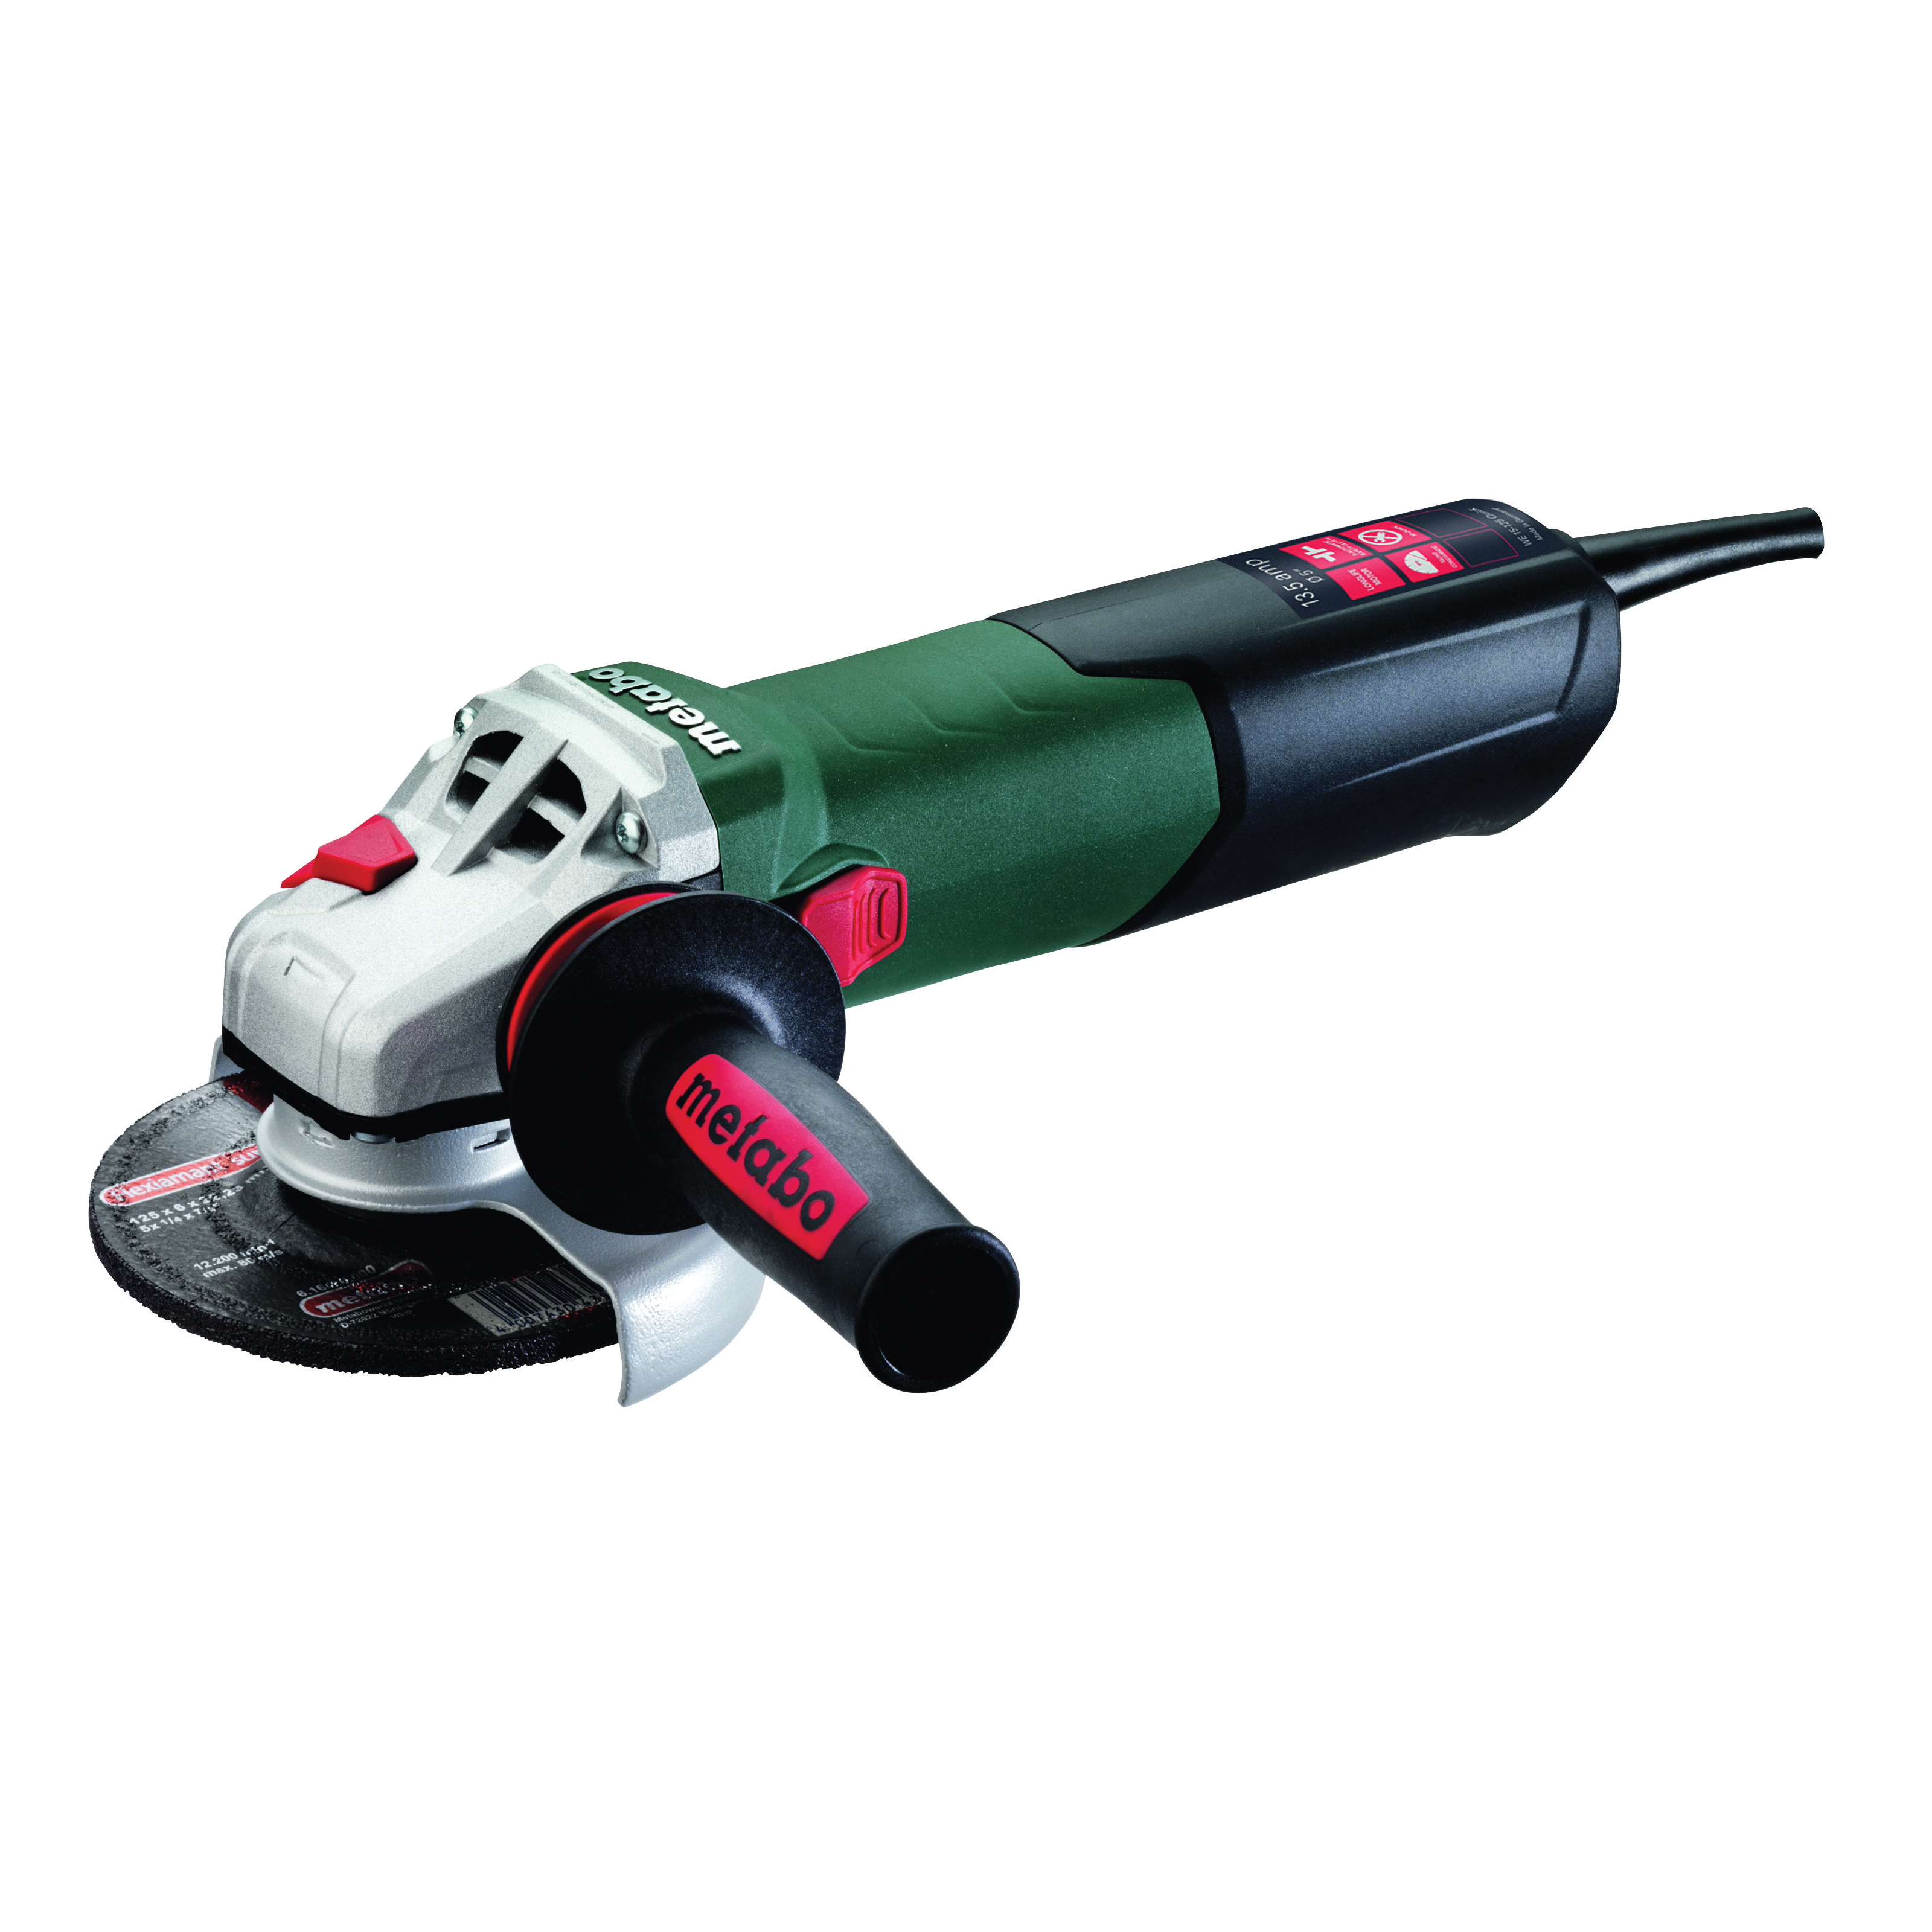 metabo® 600398420 Electric Angle Grinder, 5 in Dia Wheel, 5/8-11 UNC Arbor/Shank, 110 to 120 VAC/VDC, 50 to 60 Hz